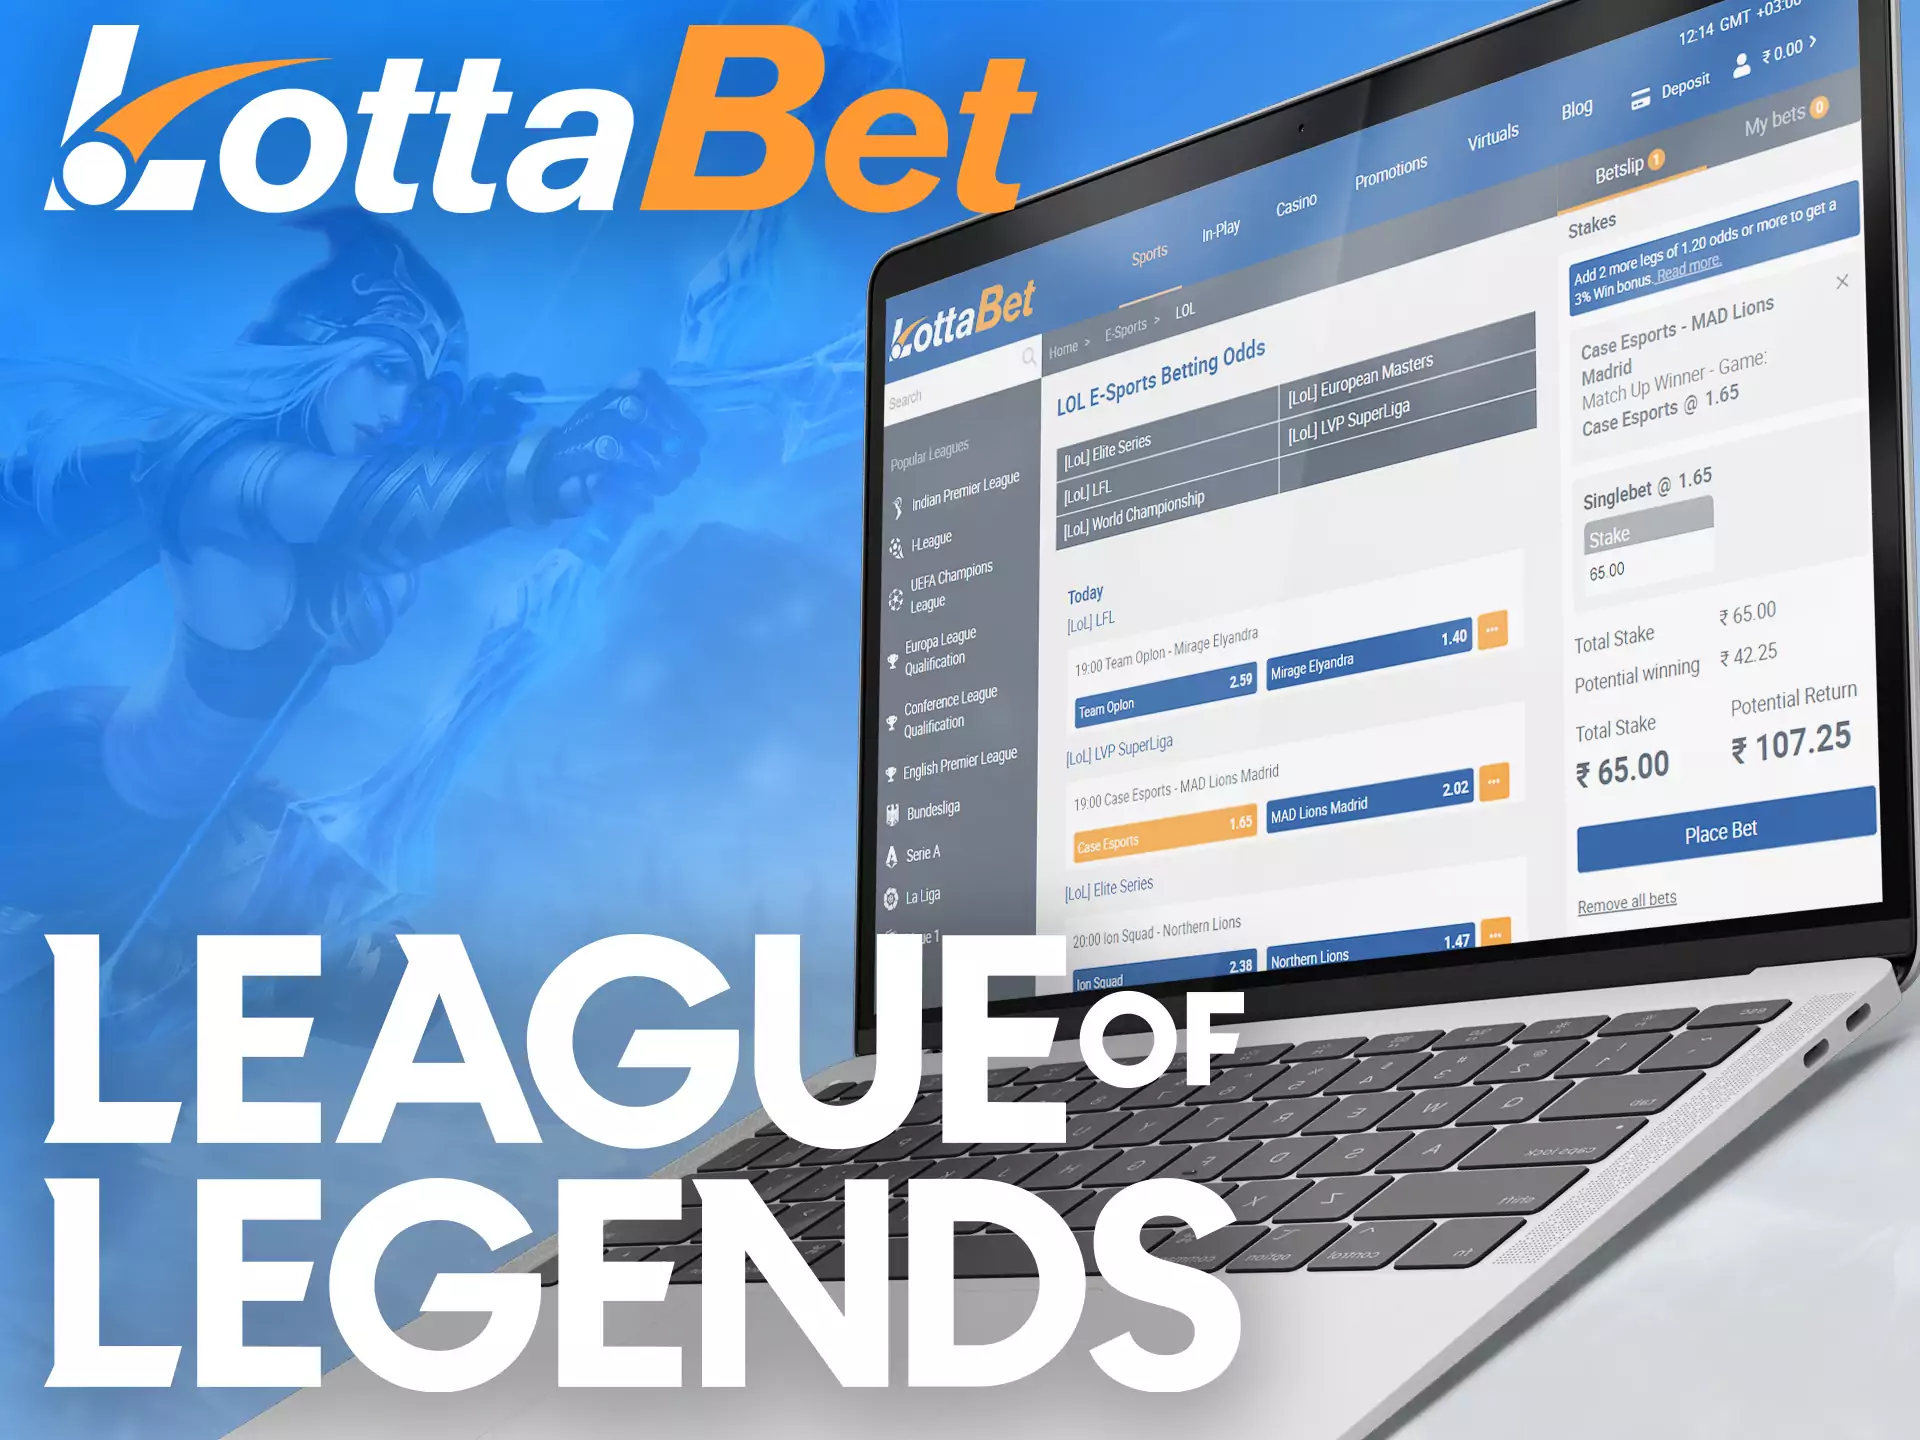 The League of Legends matches are widely presented on Lottabet.